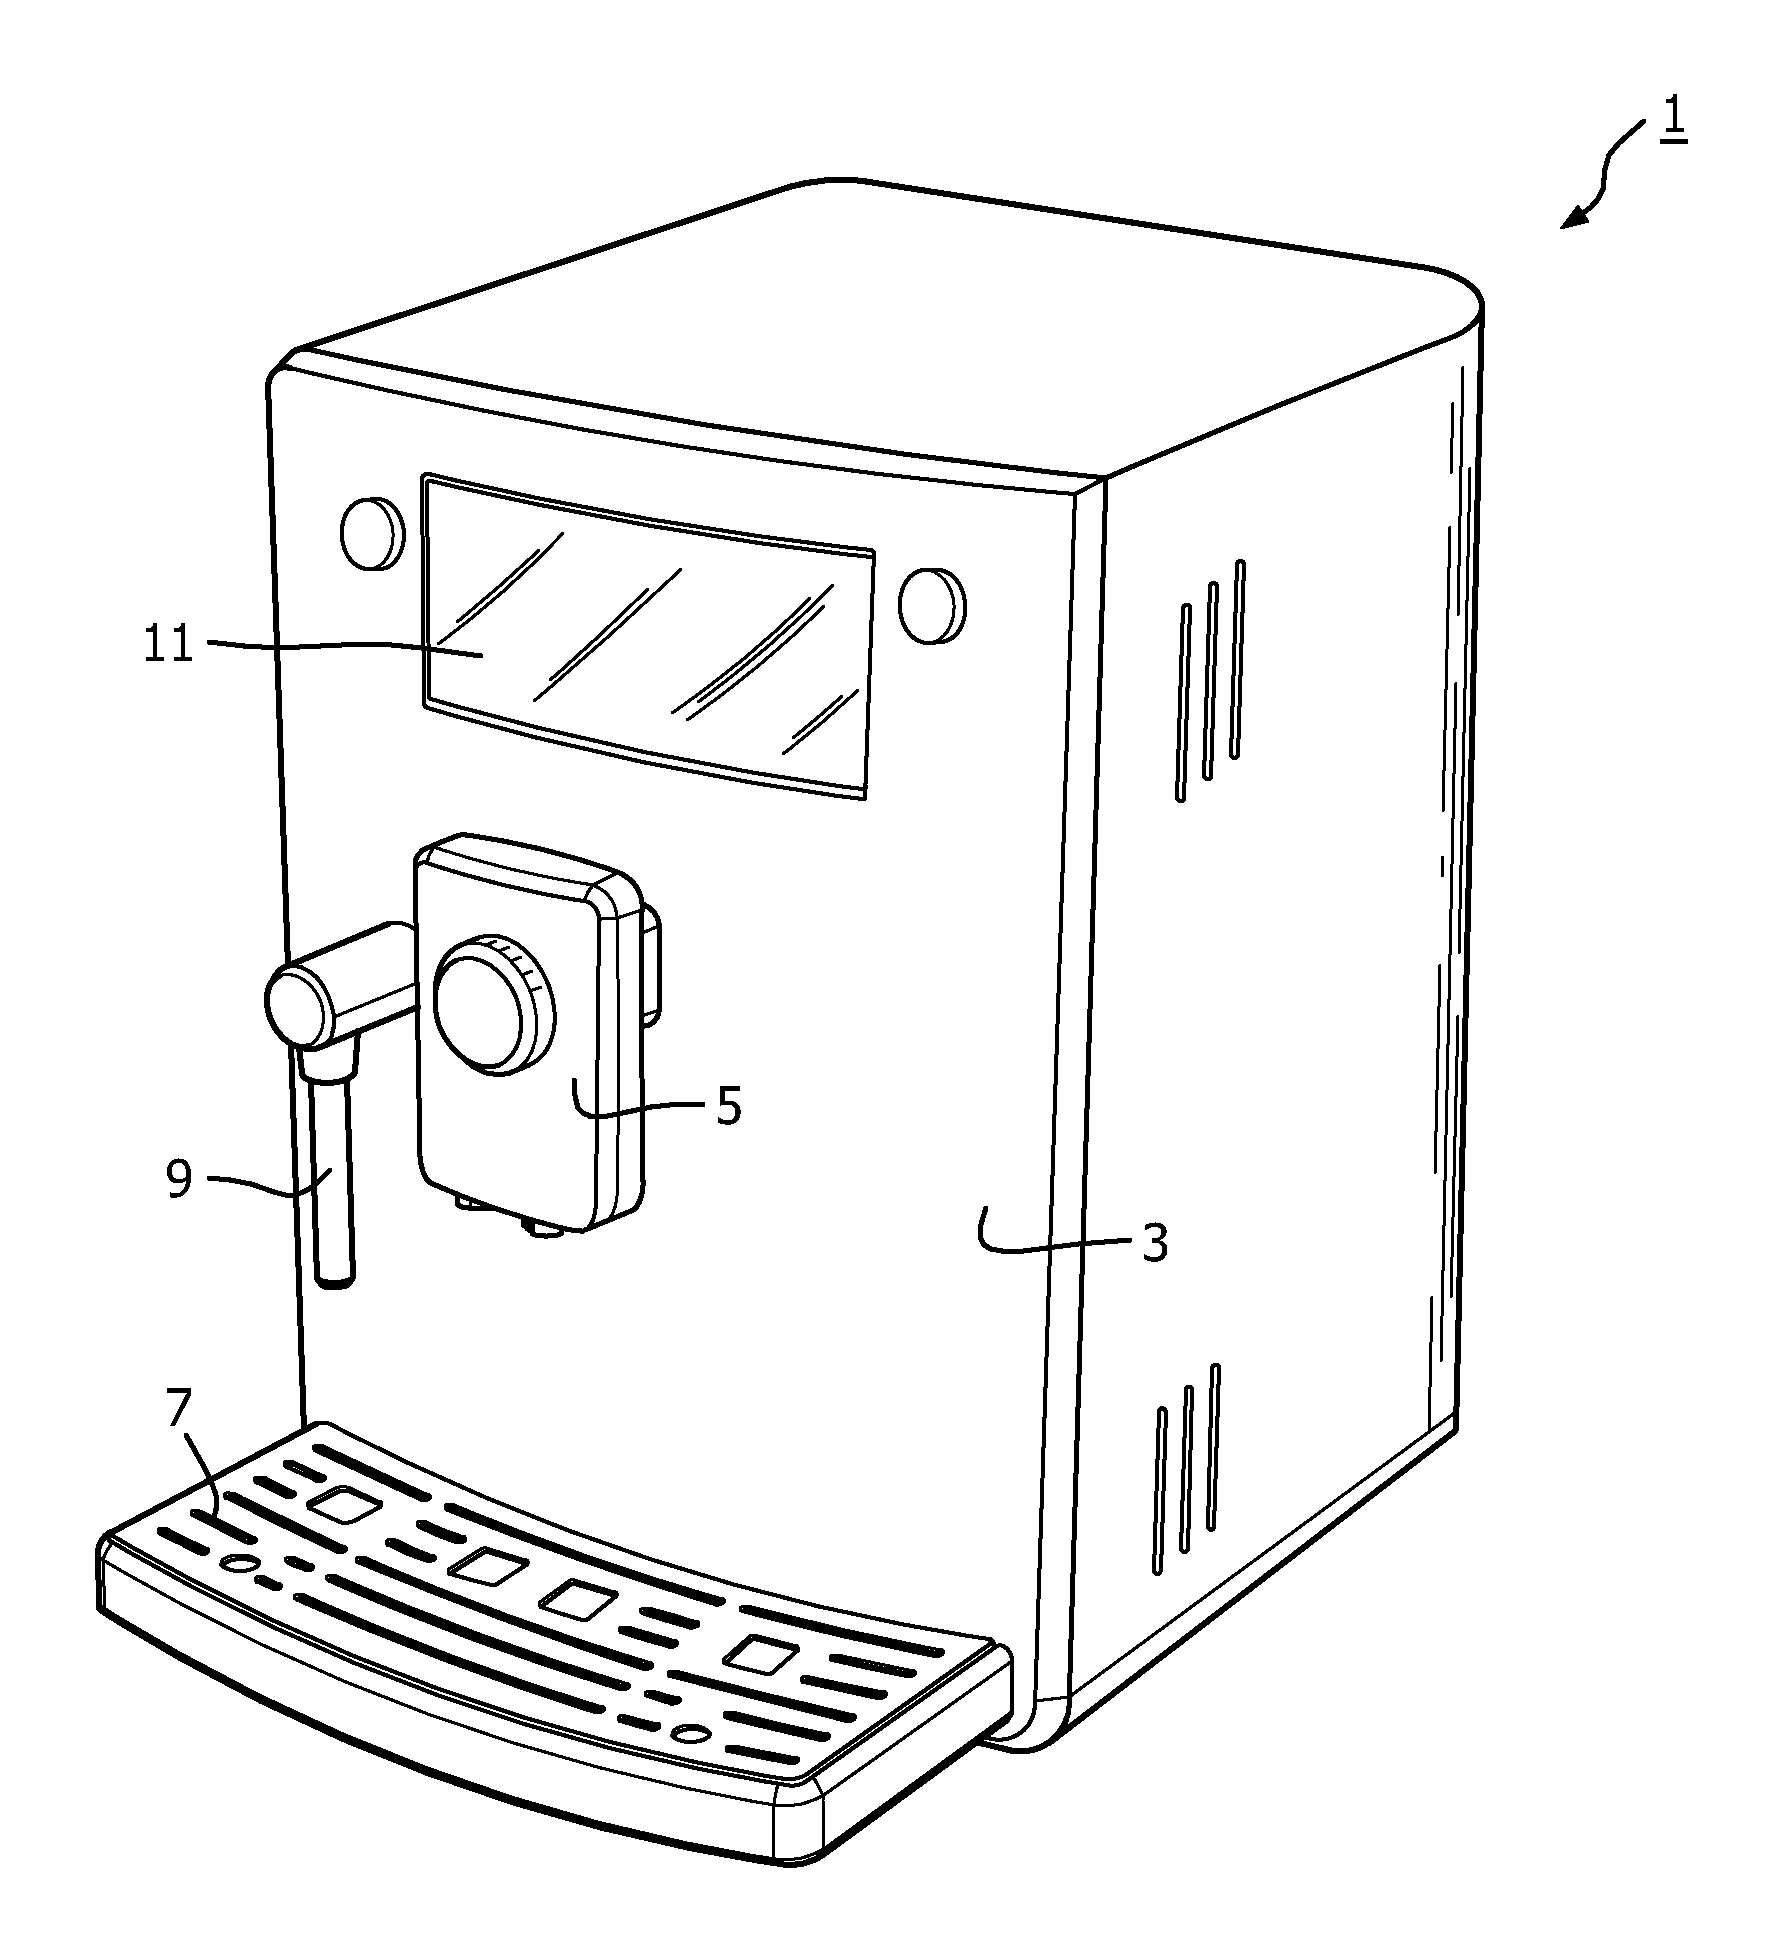 Infusion unit with variable volume infusion chamber